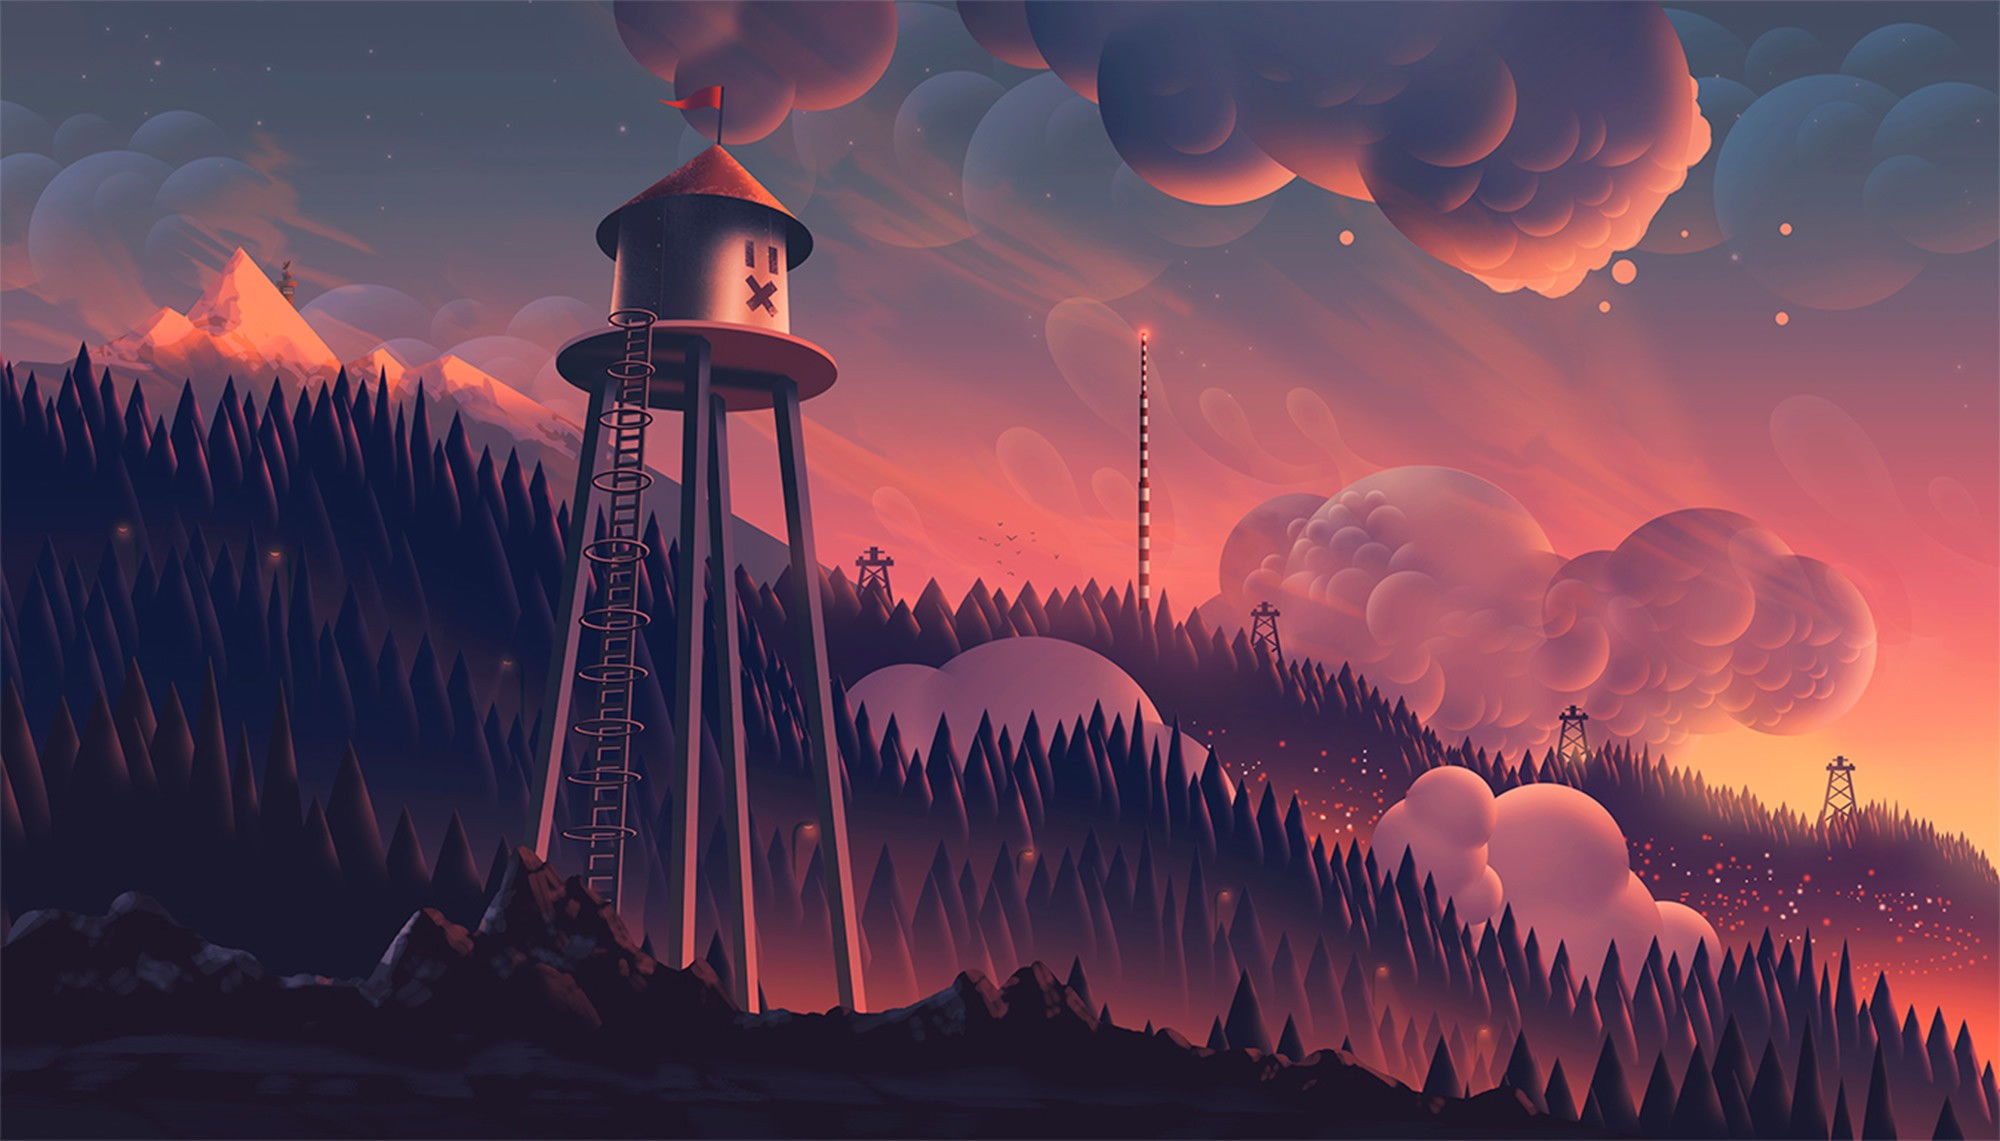 General 2000x1141 digital art Aaron Campbell trees clouds forest fantasy art mountains sunset